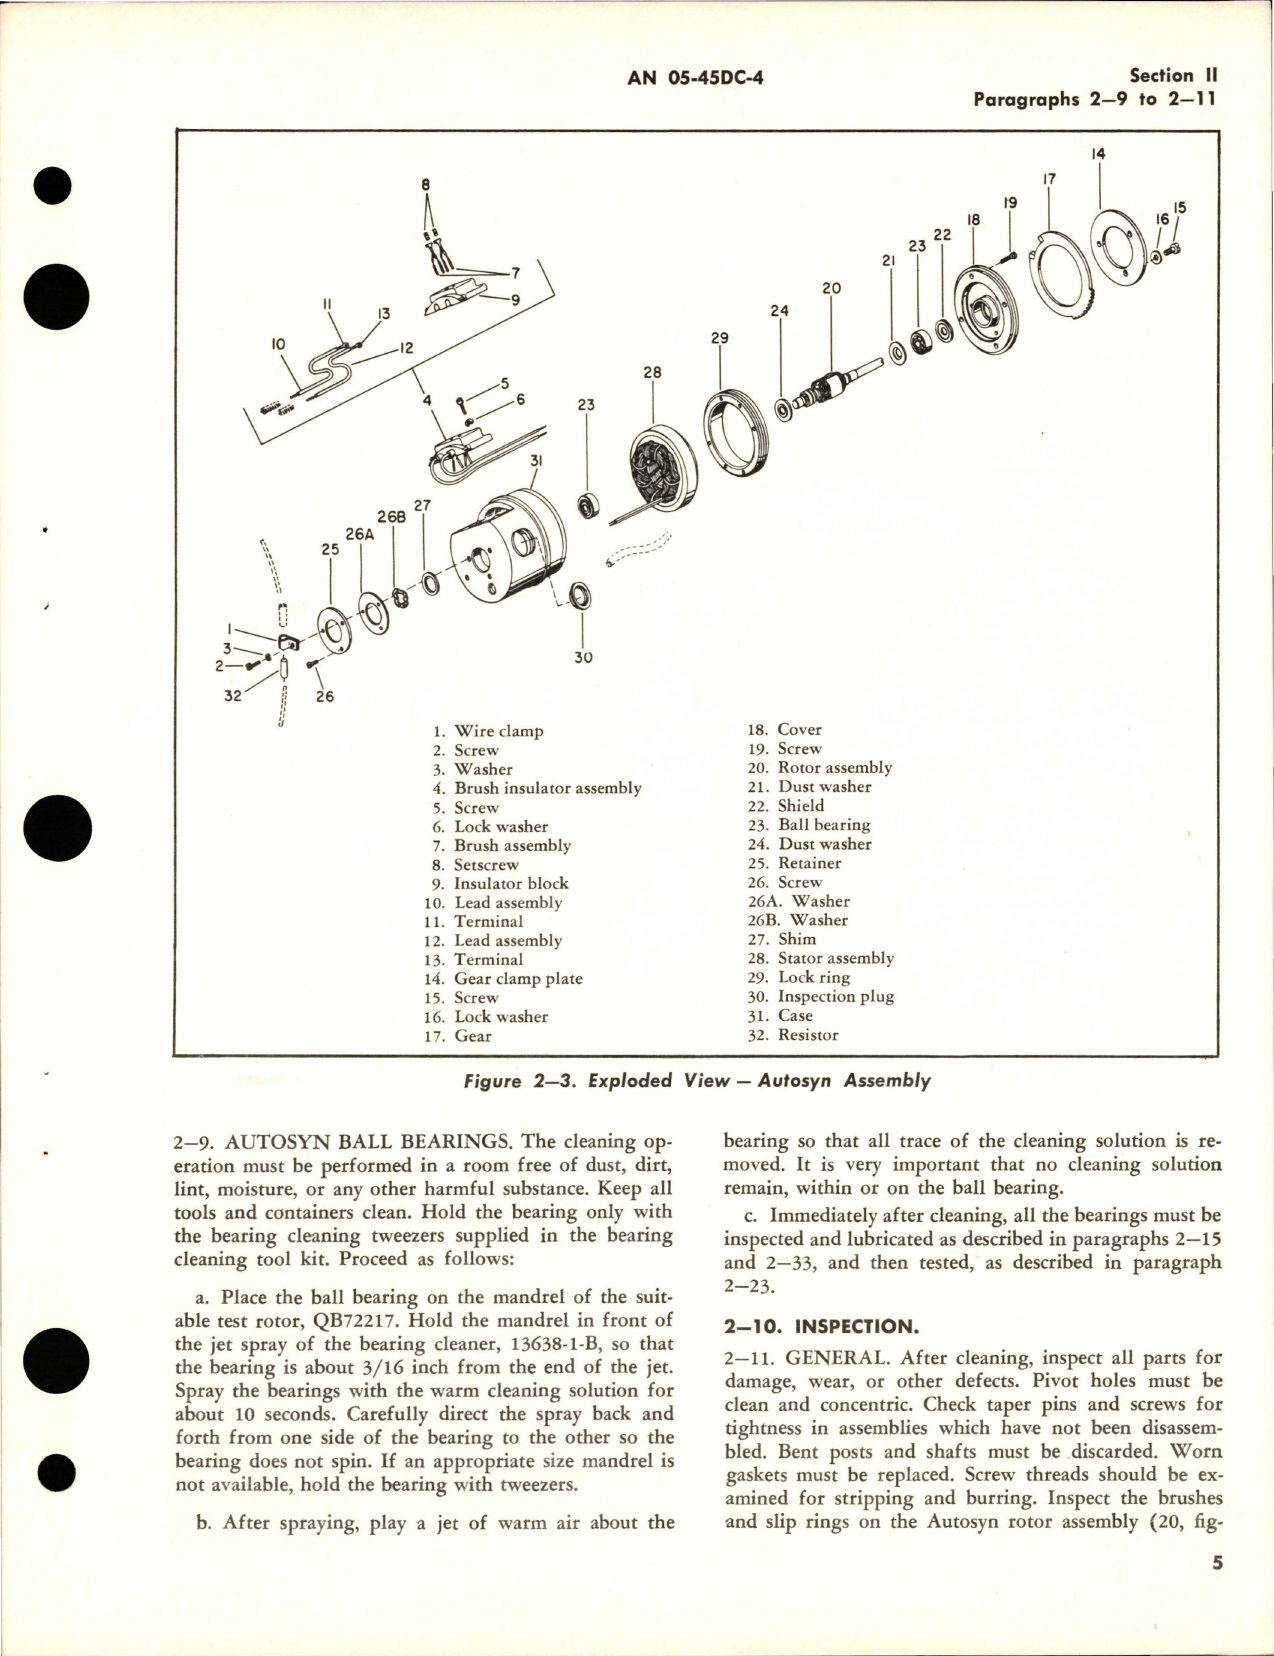 Sample page 9 from AirCorps Library document: Overhaul Instructions for Throttle Servo - Parts 15621-1-A, 15650-1-A and Trim Tab Servo - Part 15622-1-A